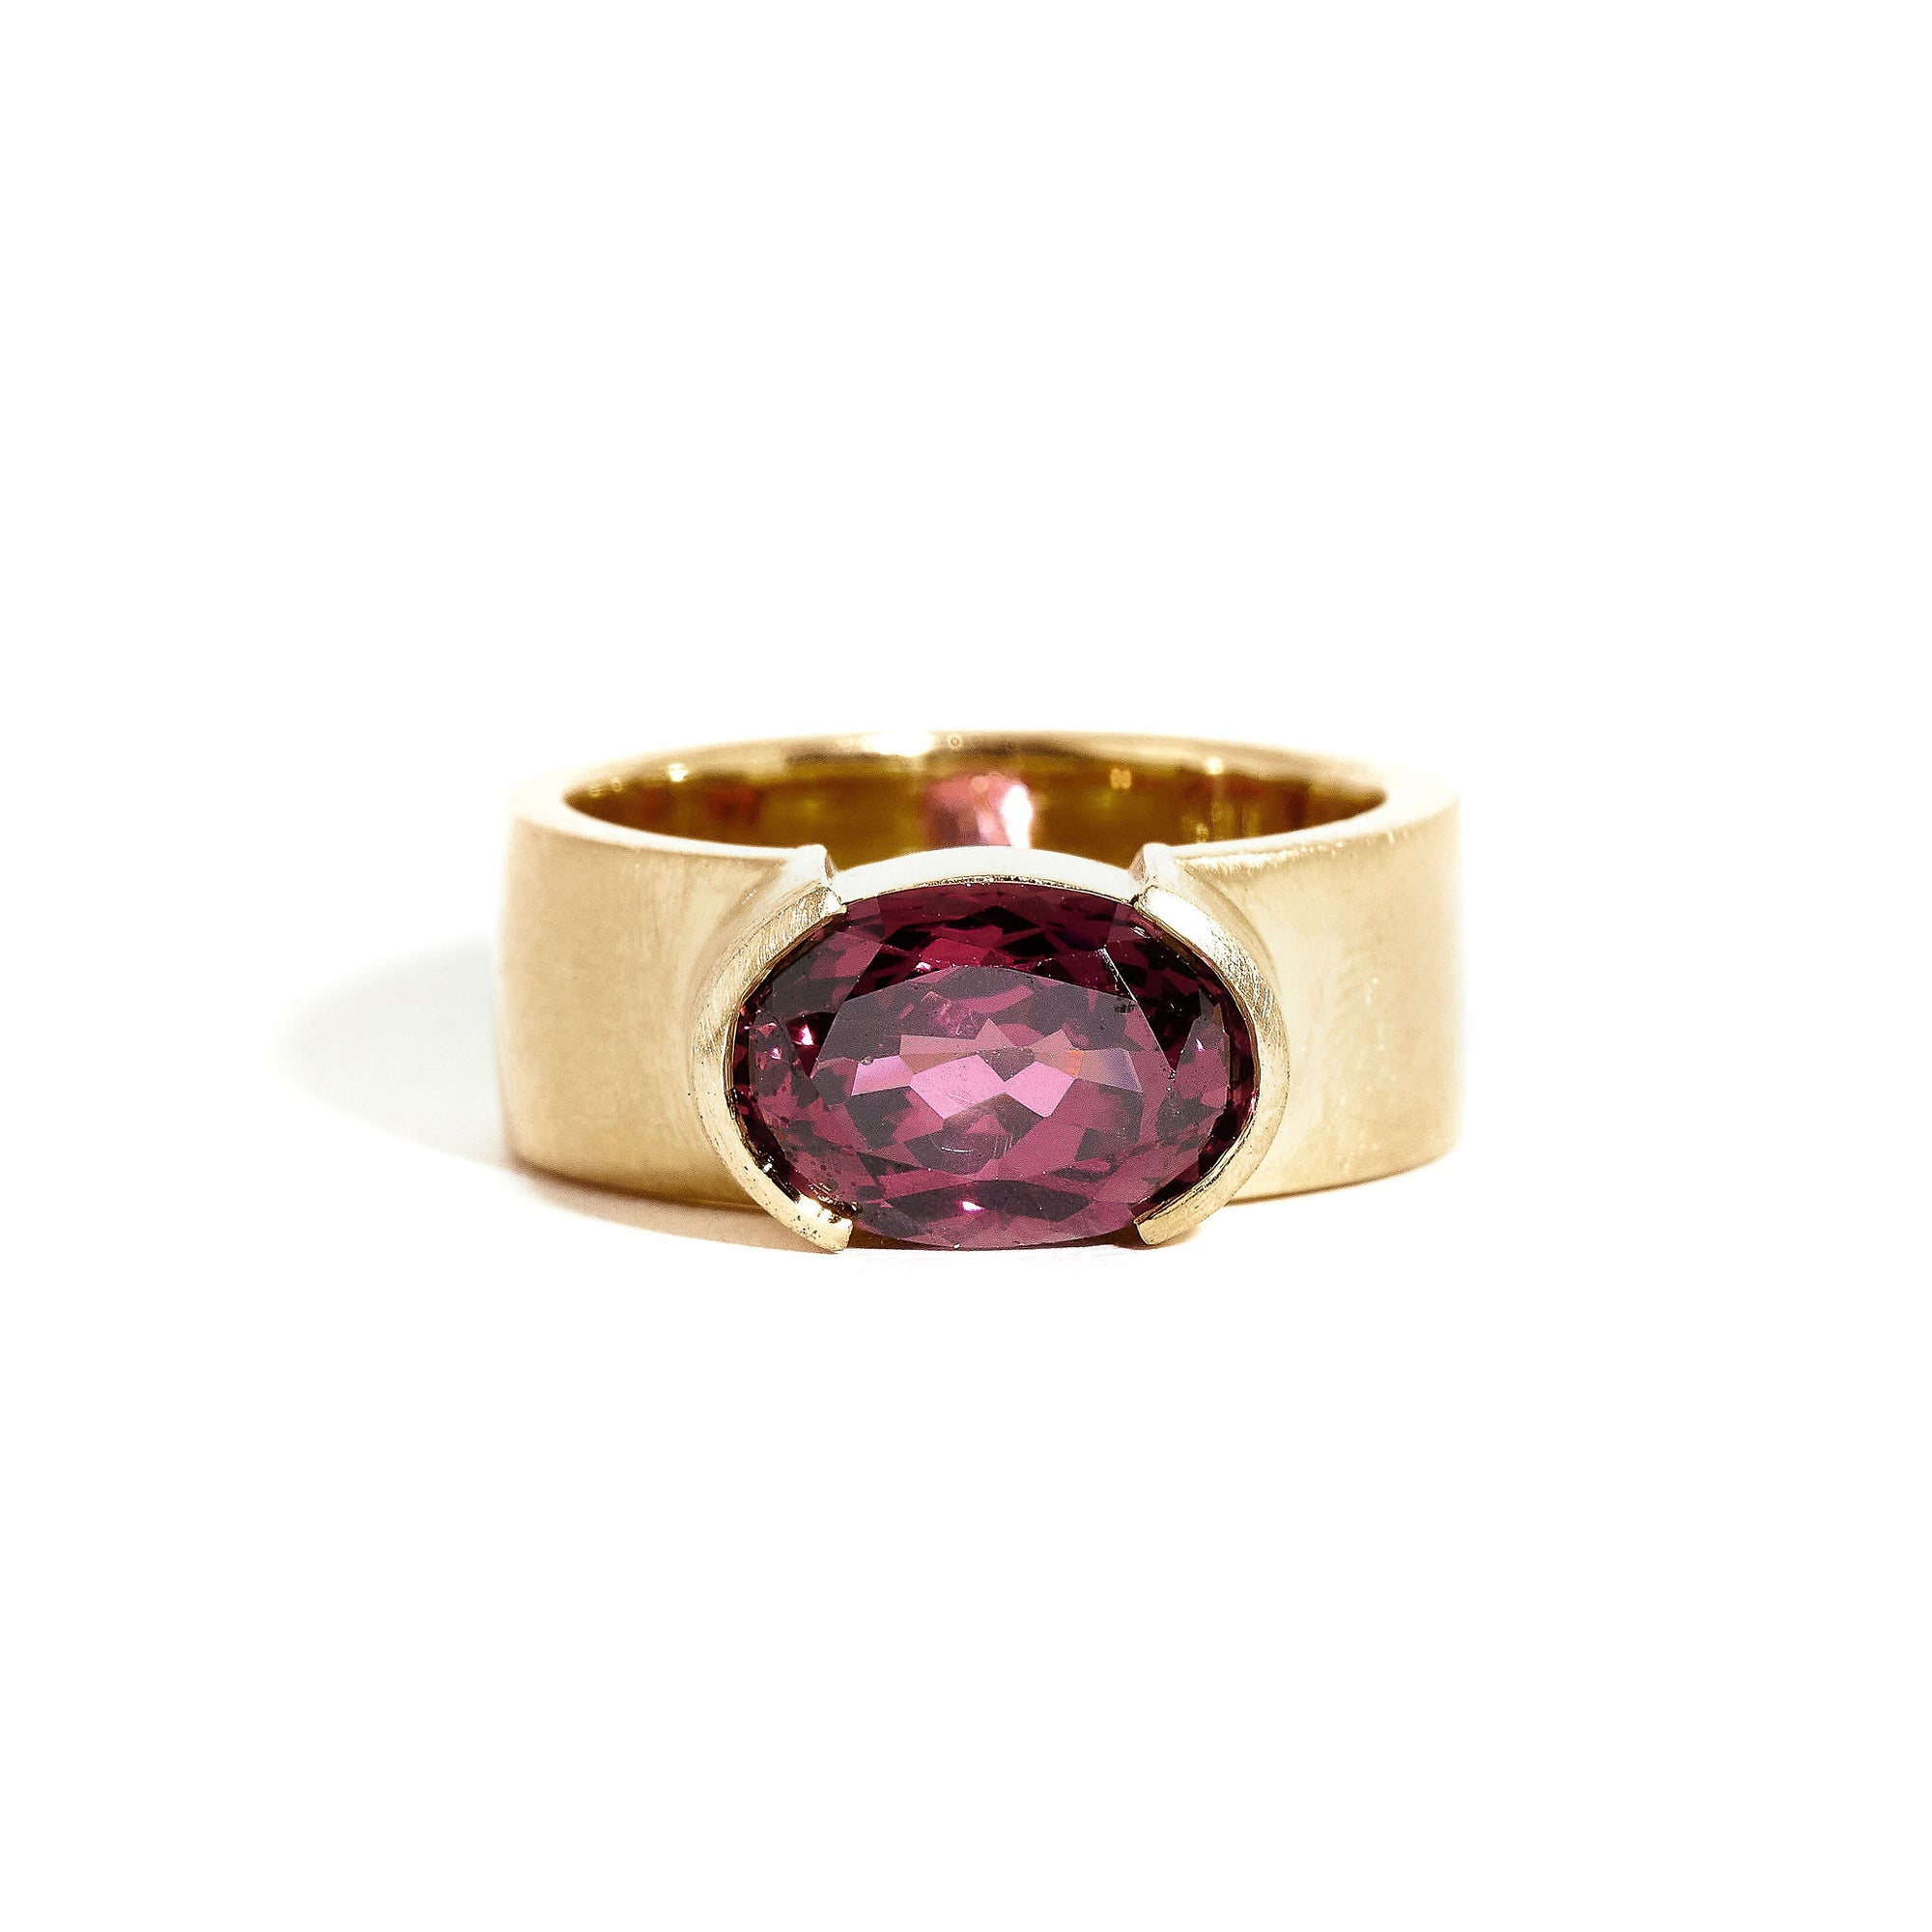 Garnet ring wth 7mm band and partial bezel setting